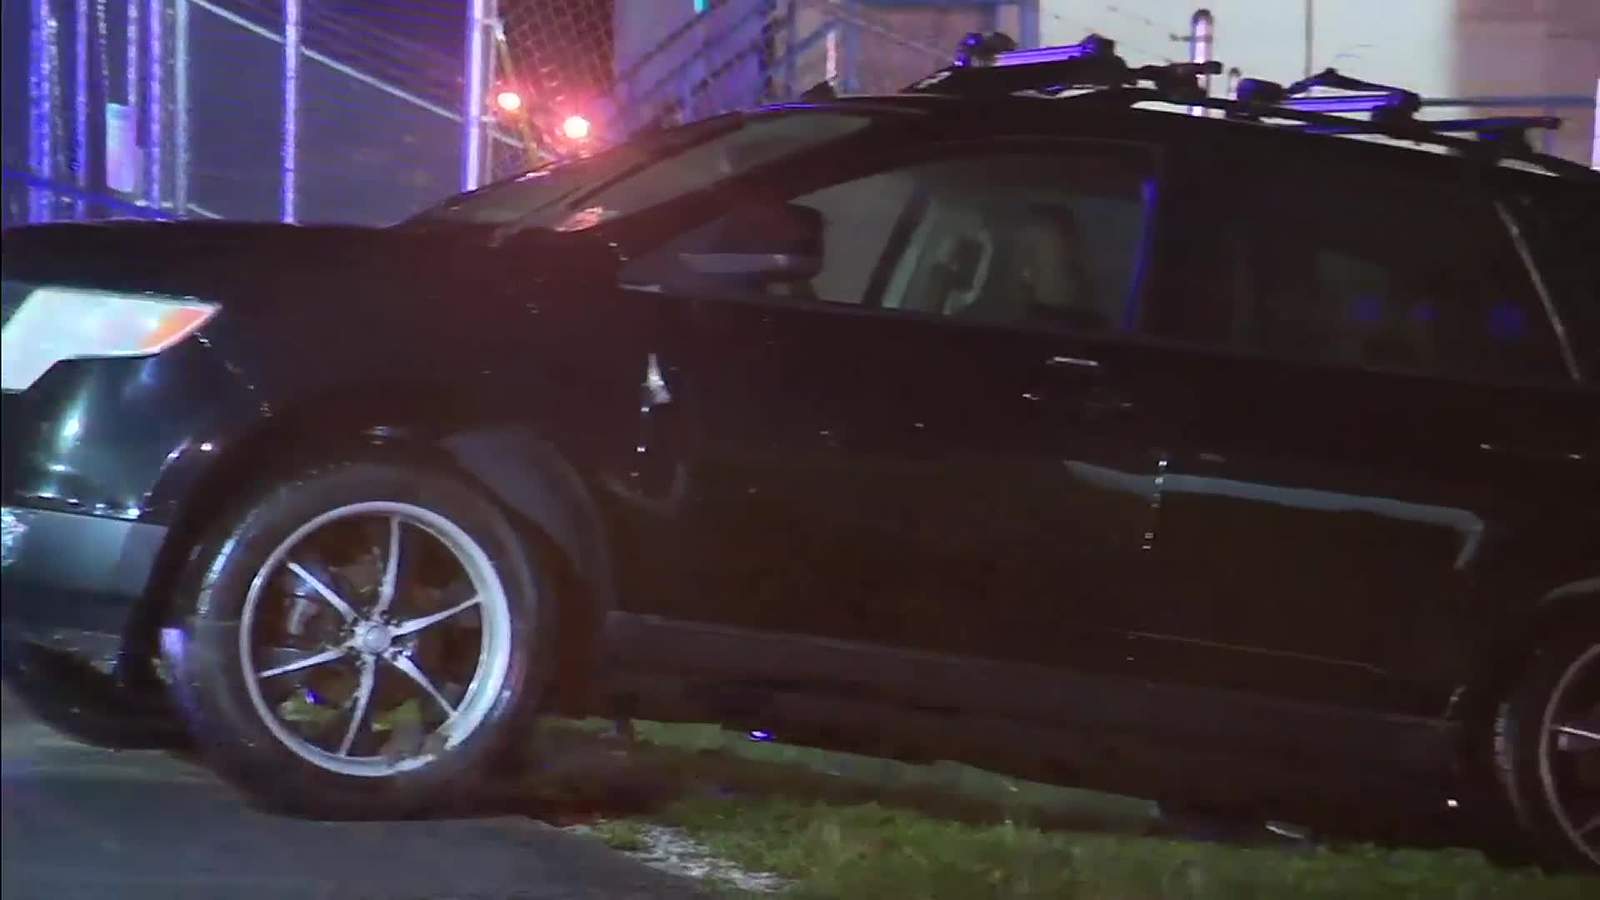 Police investigating possible DUI after car goes into canal in Davie